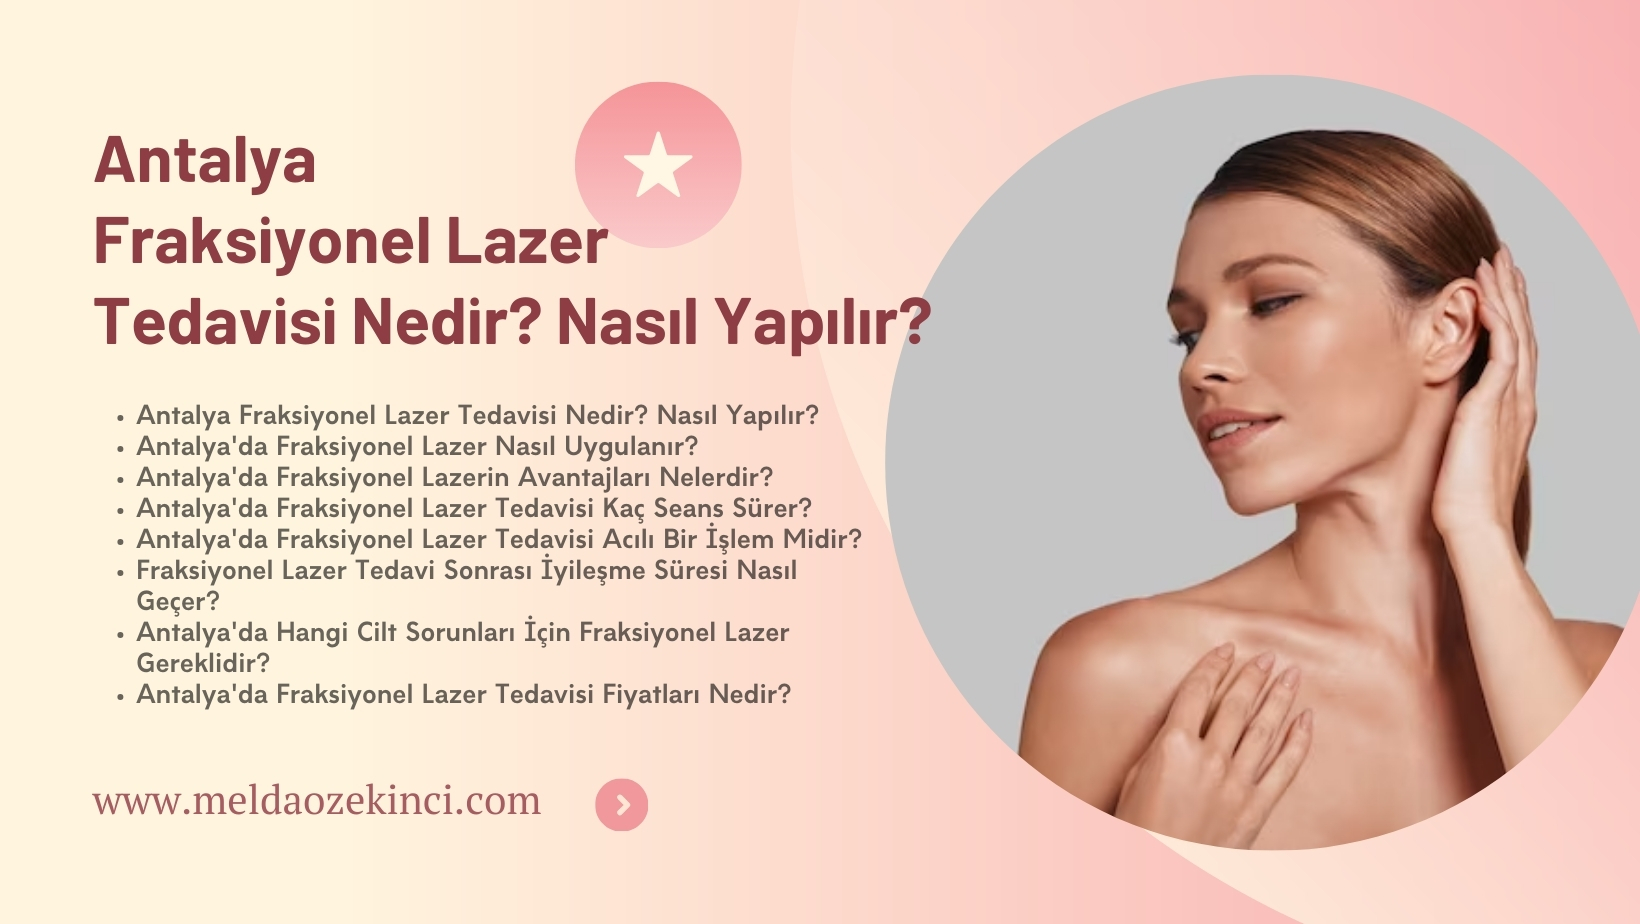 What is Antalya Fractional Laser Treatment? How is it Done?